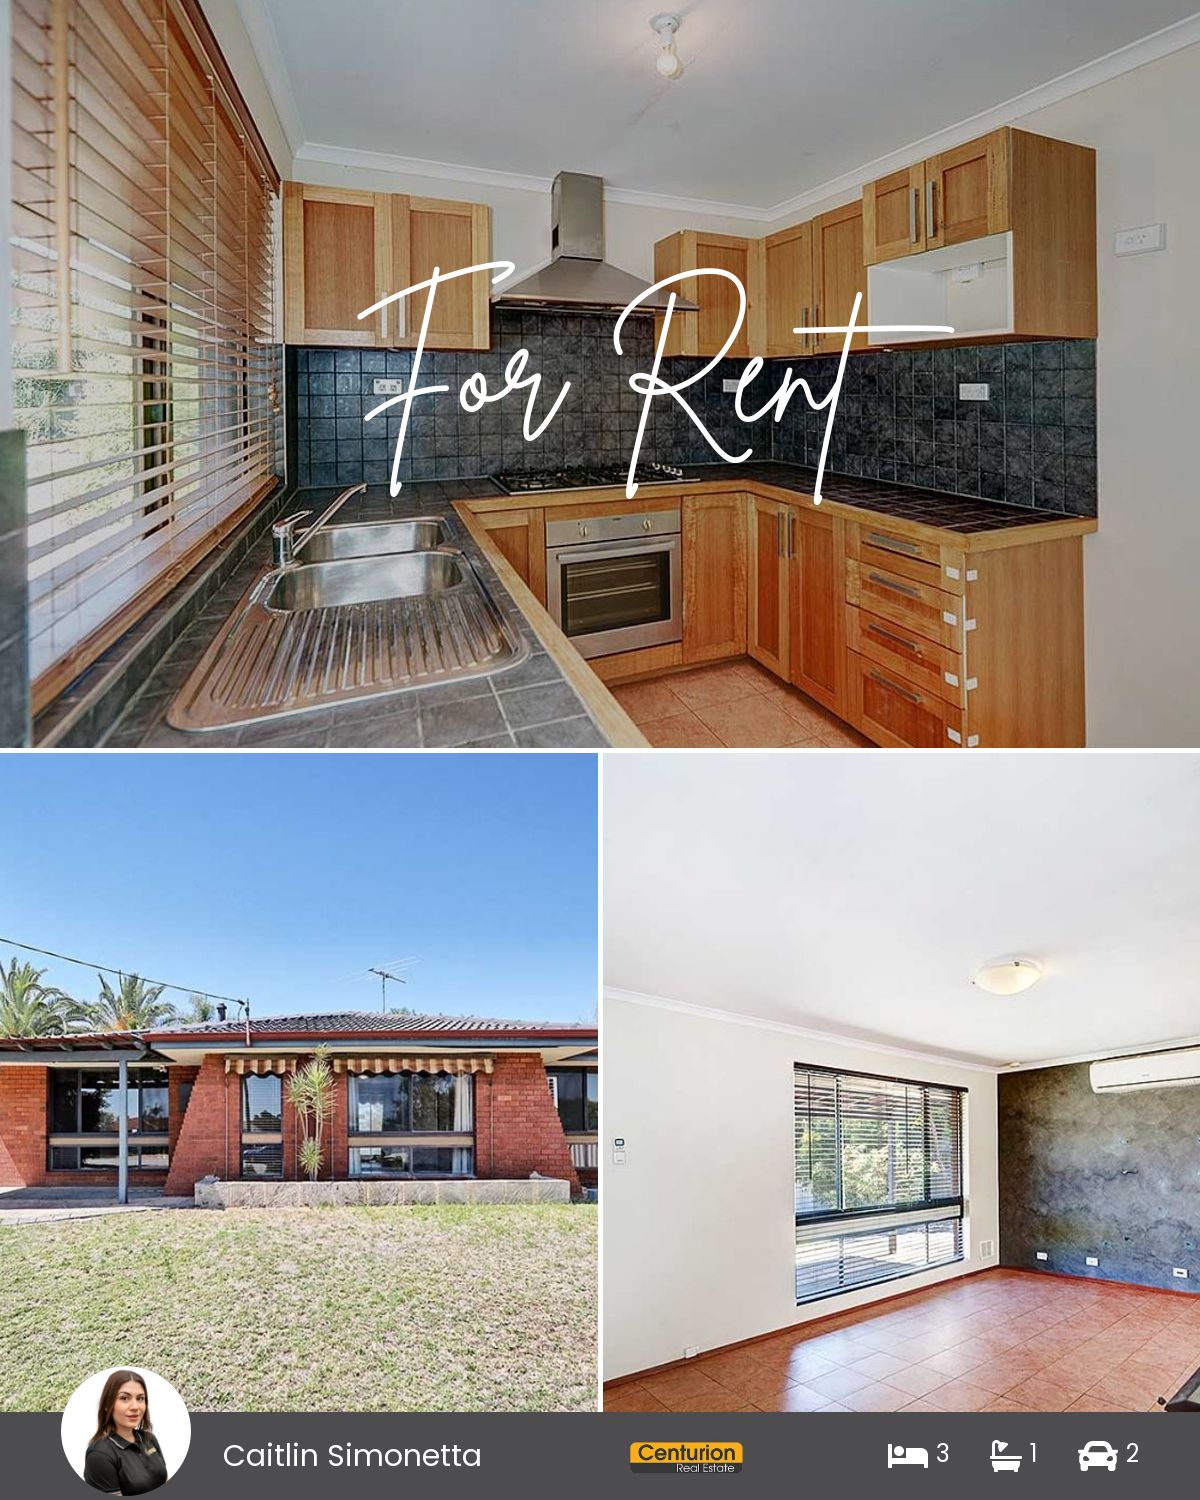 12 Gilmore Place, Forrestfield, WA 6058 | Realty.com.au